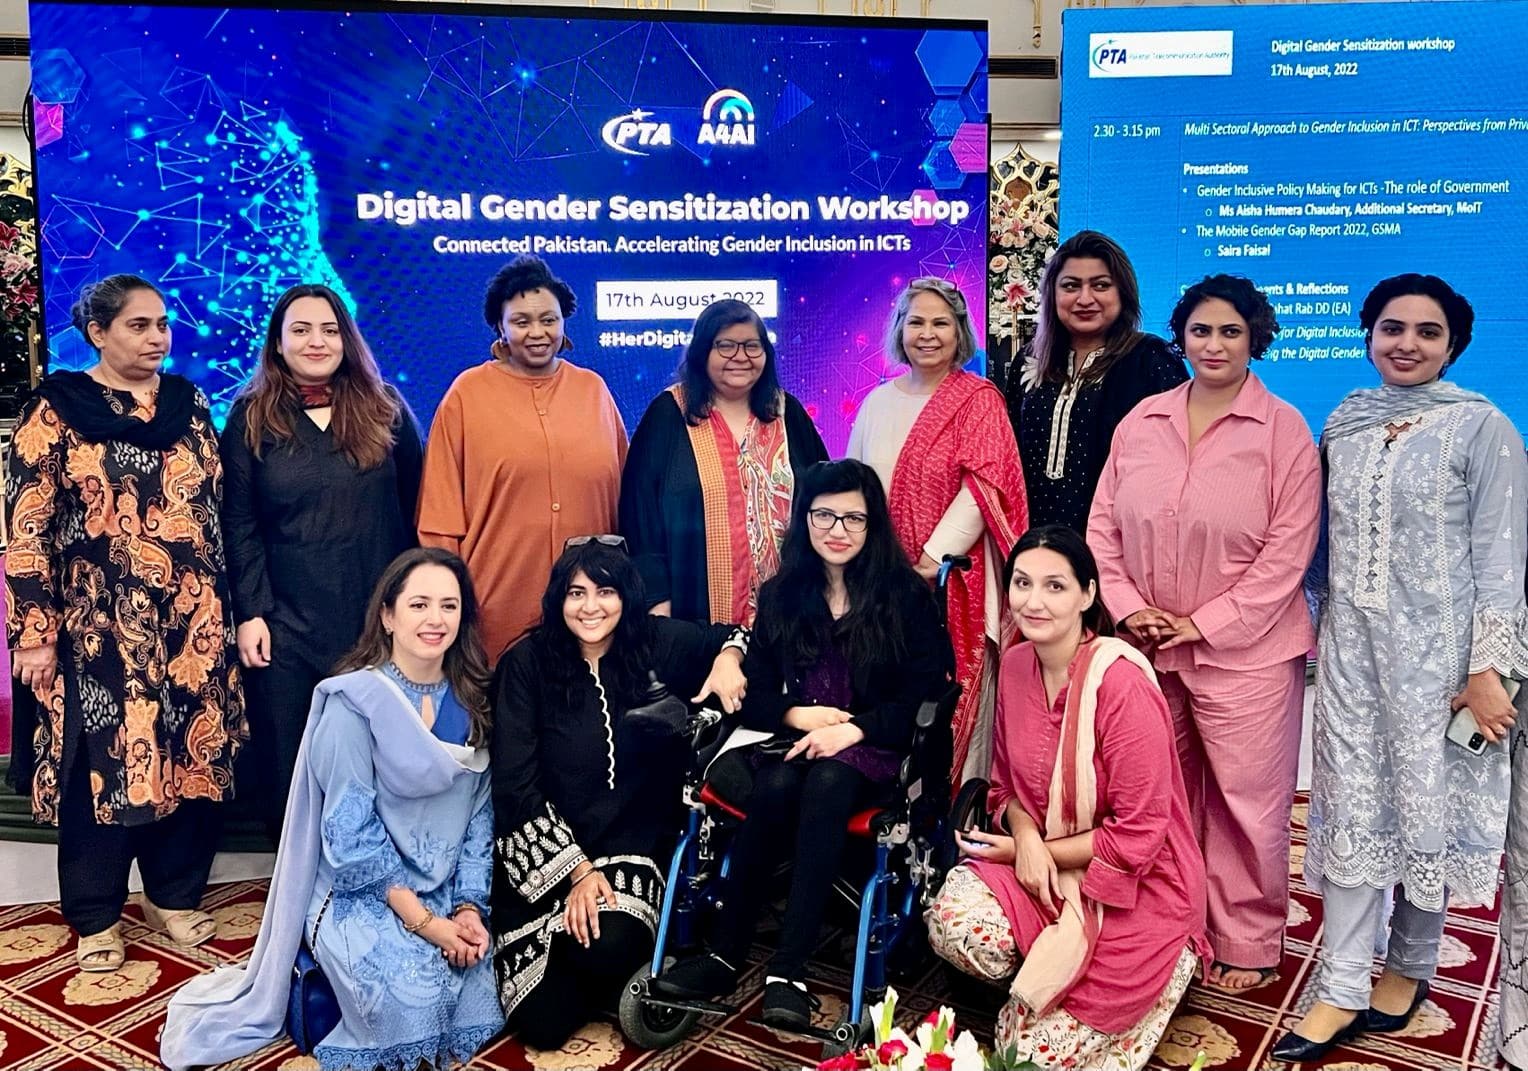 The Importance of Gender Inclusion and Gender-Responsiveness in ICT and Broadband policymaking in Pakistan